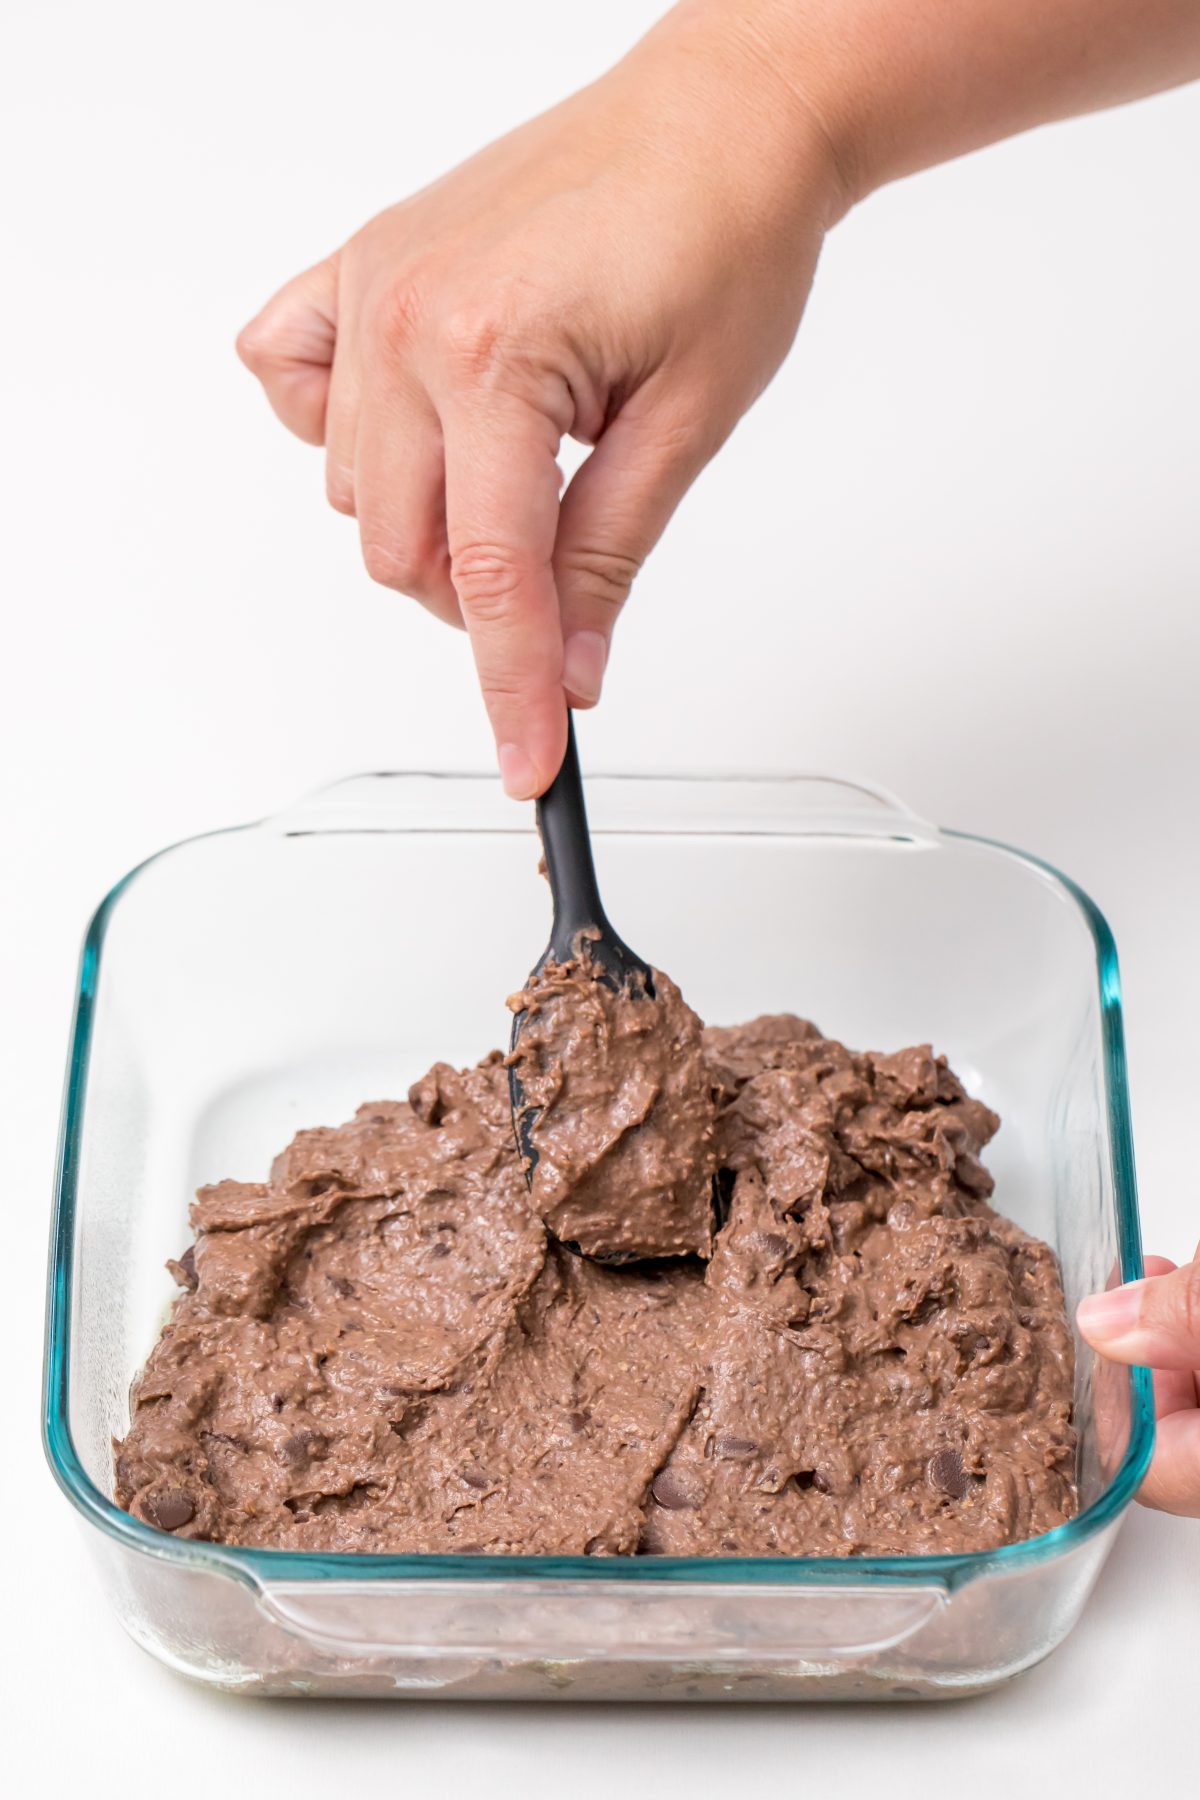 Spread brownie mixture into a greased pan